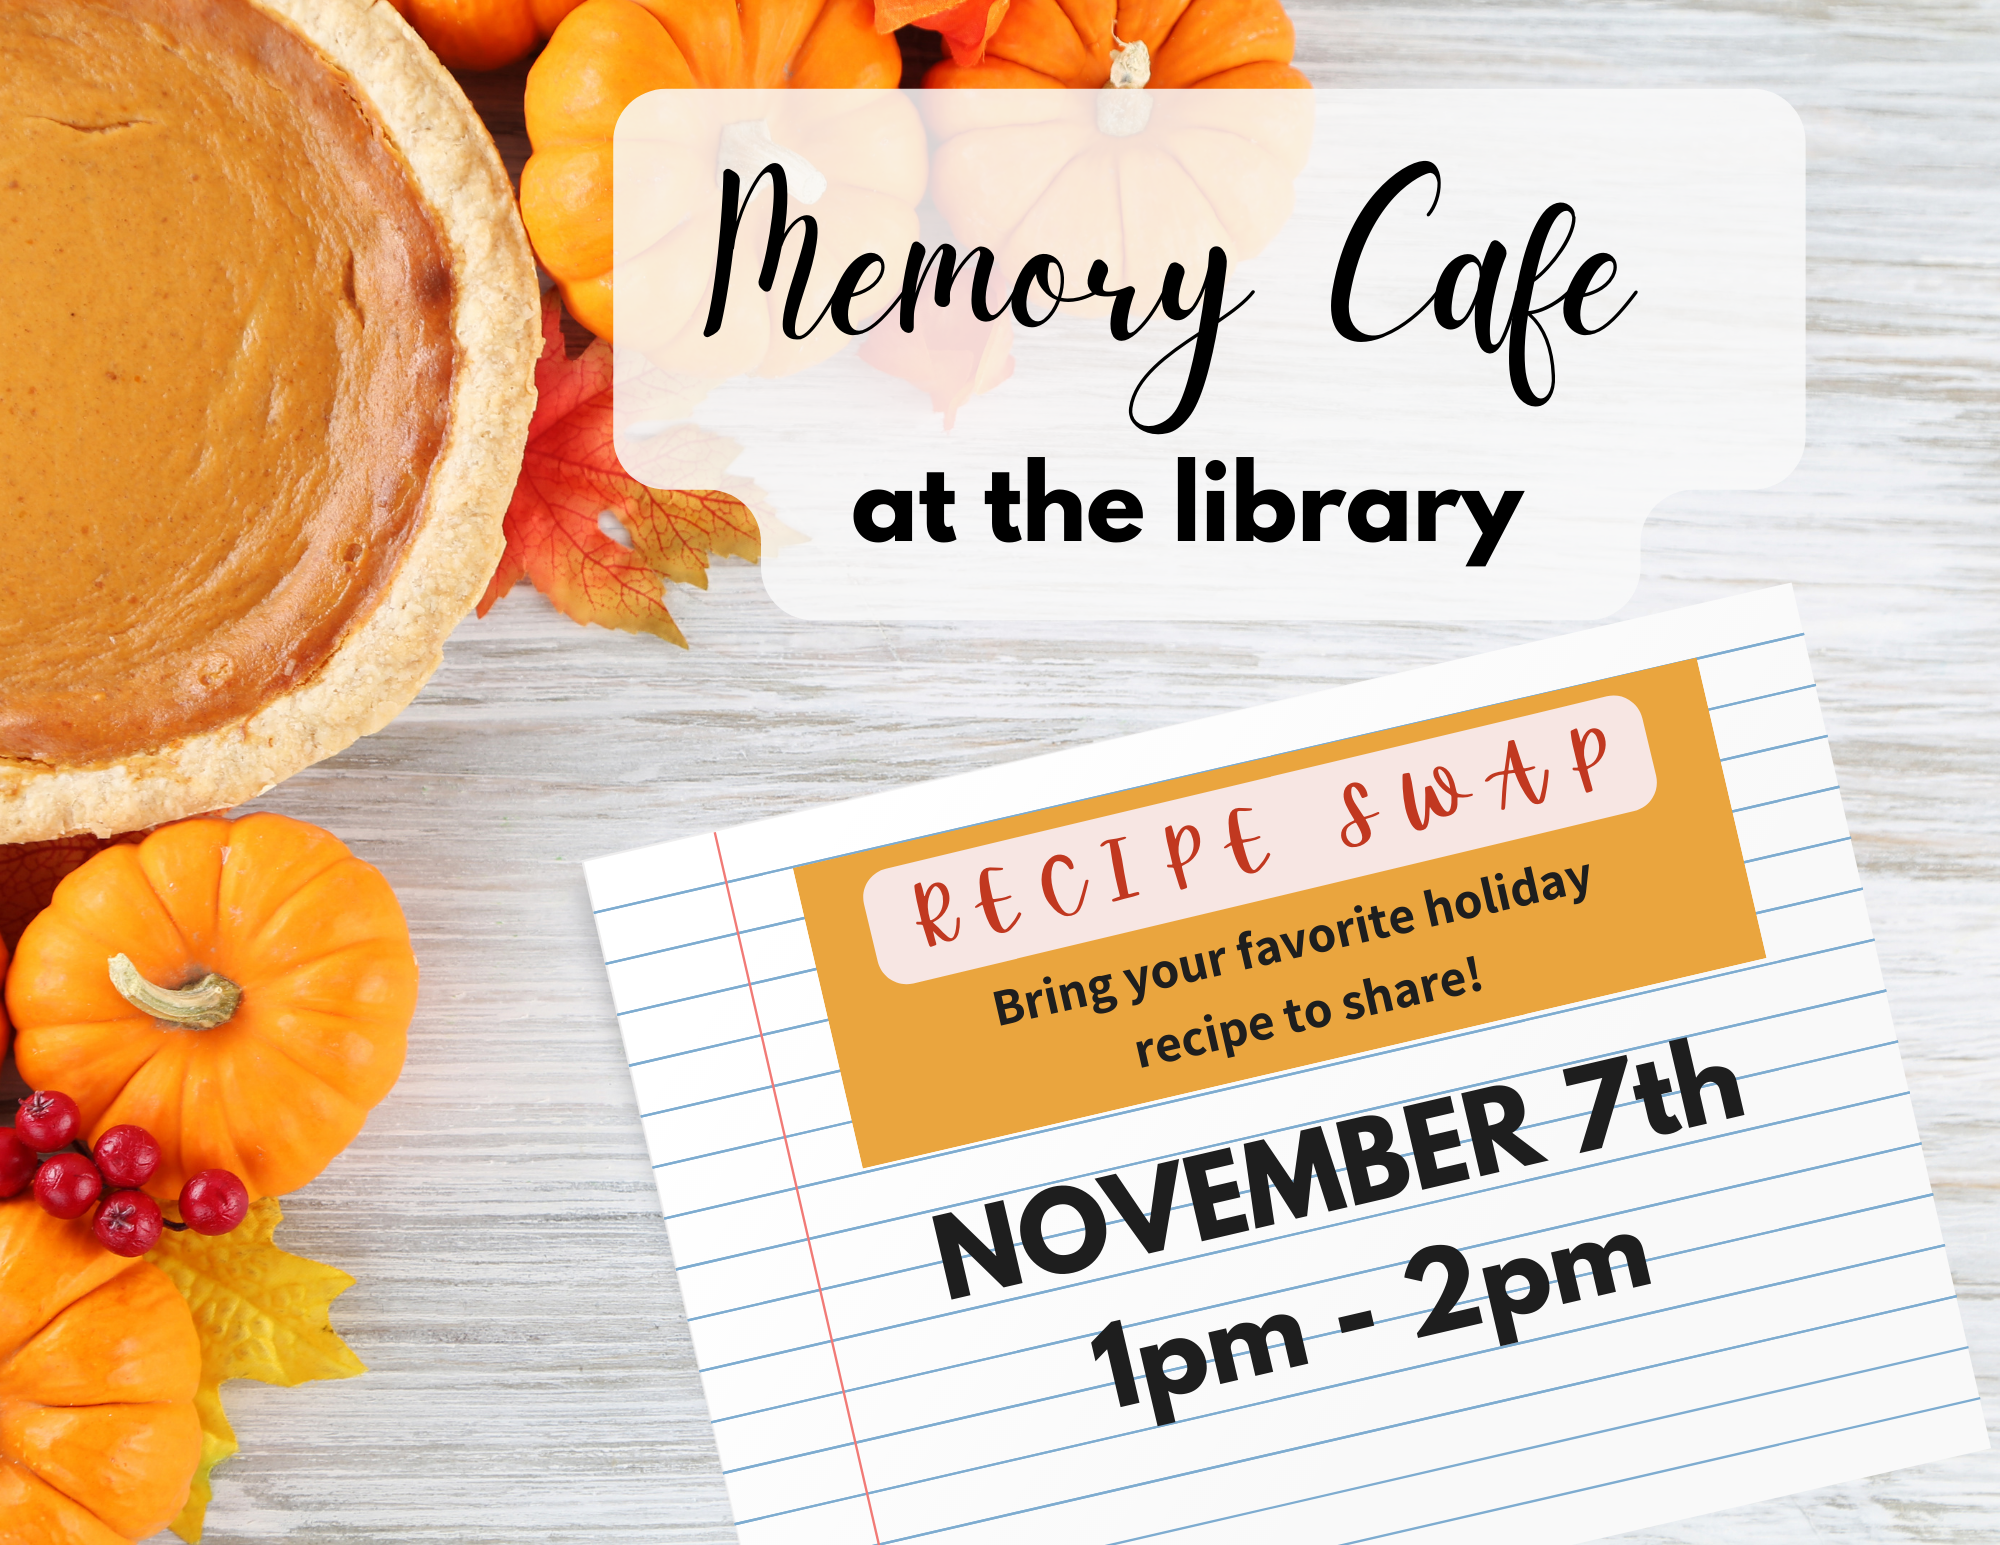 Memory Cafe at the library. Recipe Swap. Bring your favorite holiday recipe to share! November 7th from 1 to 2 pm. Pumpkin pie, mini pumpkins, orange and red leaves, and red berries sit in one corner atop a white distressed wood background. Letters appear over a ruled recipe card.